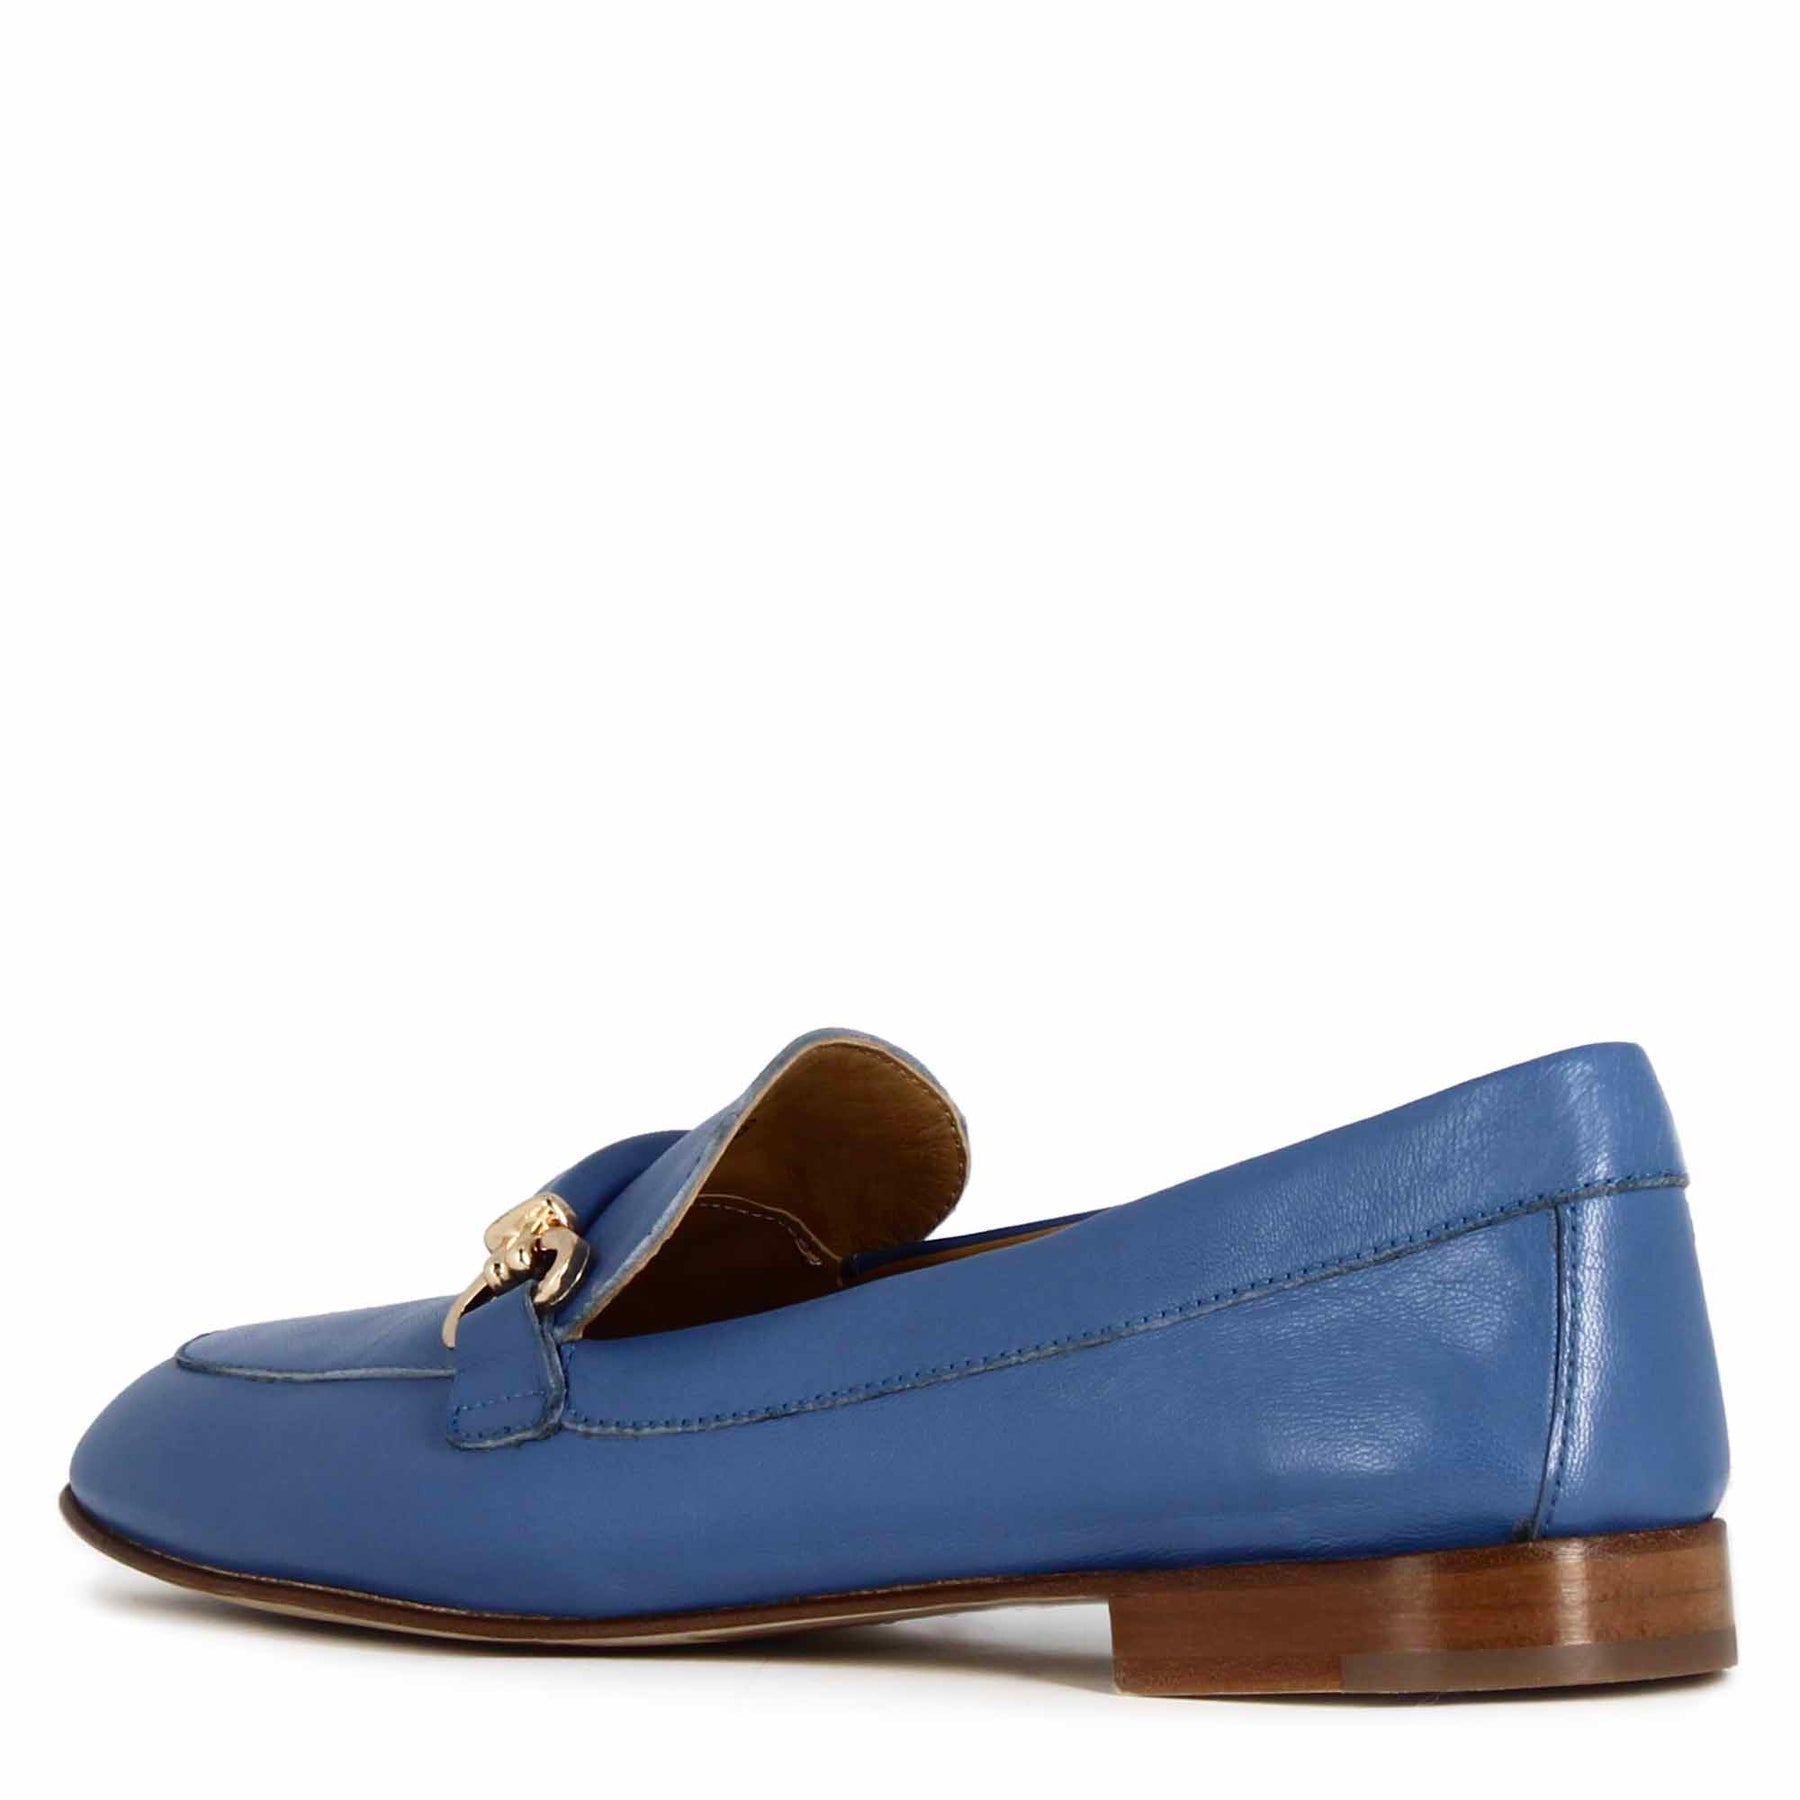 Women's Moccasin in Blue Leather